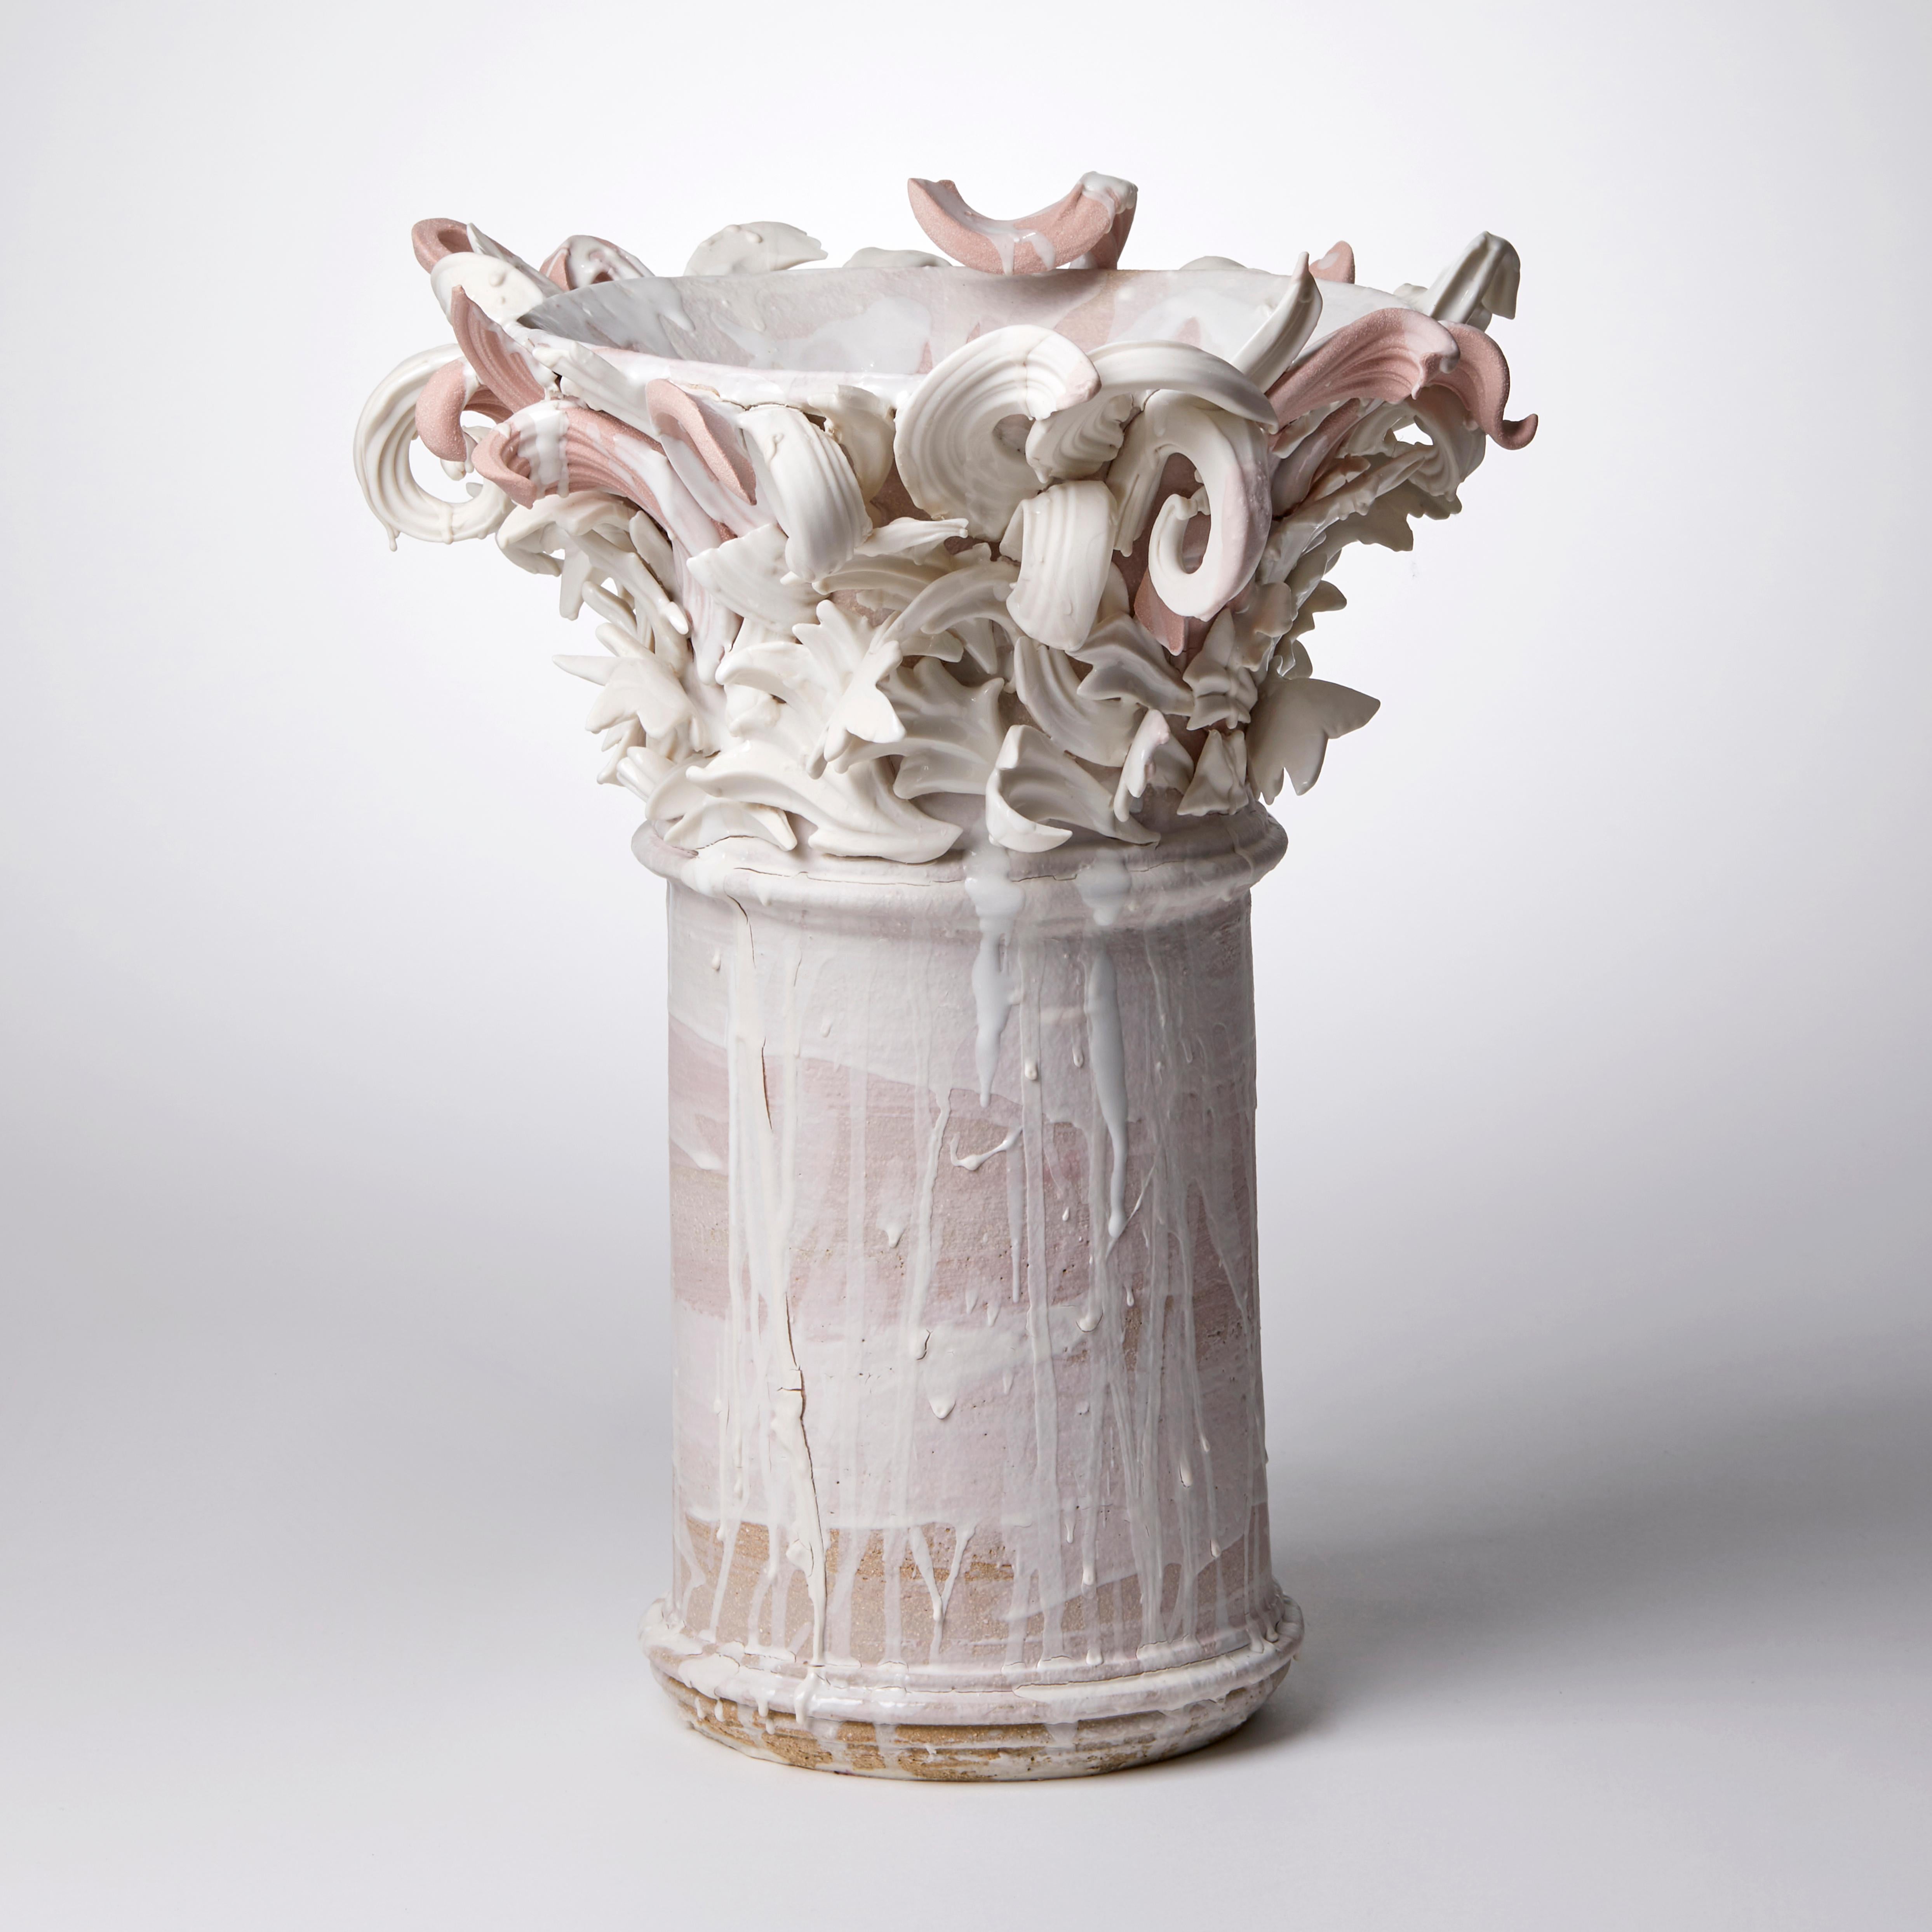 Colonnade III is a unique handmade coloured stoneware ceramic sculptural vase in dusky pink and white by the British artist Jo Taylor. The central form has been thrown on the potter's wheel and also hand-built, then adorned with architectural